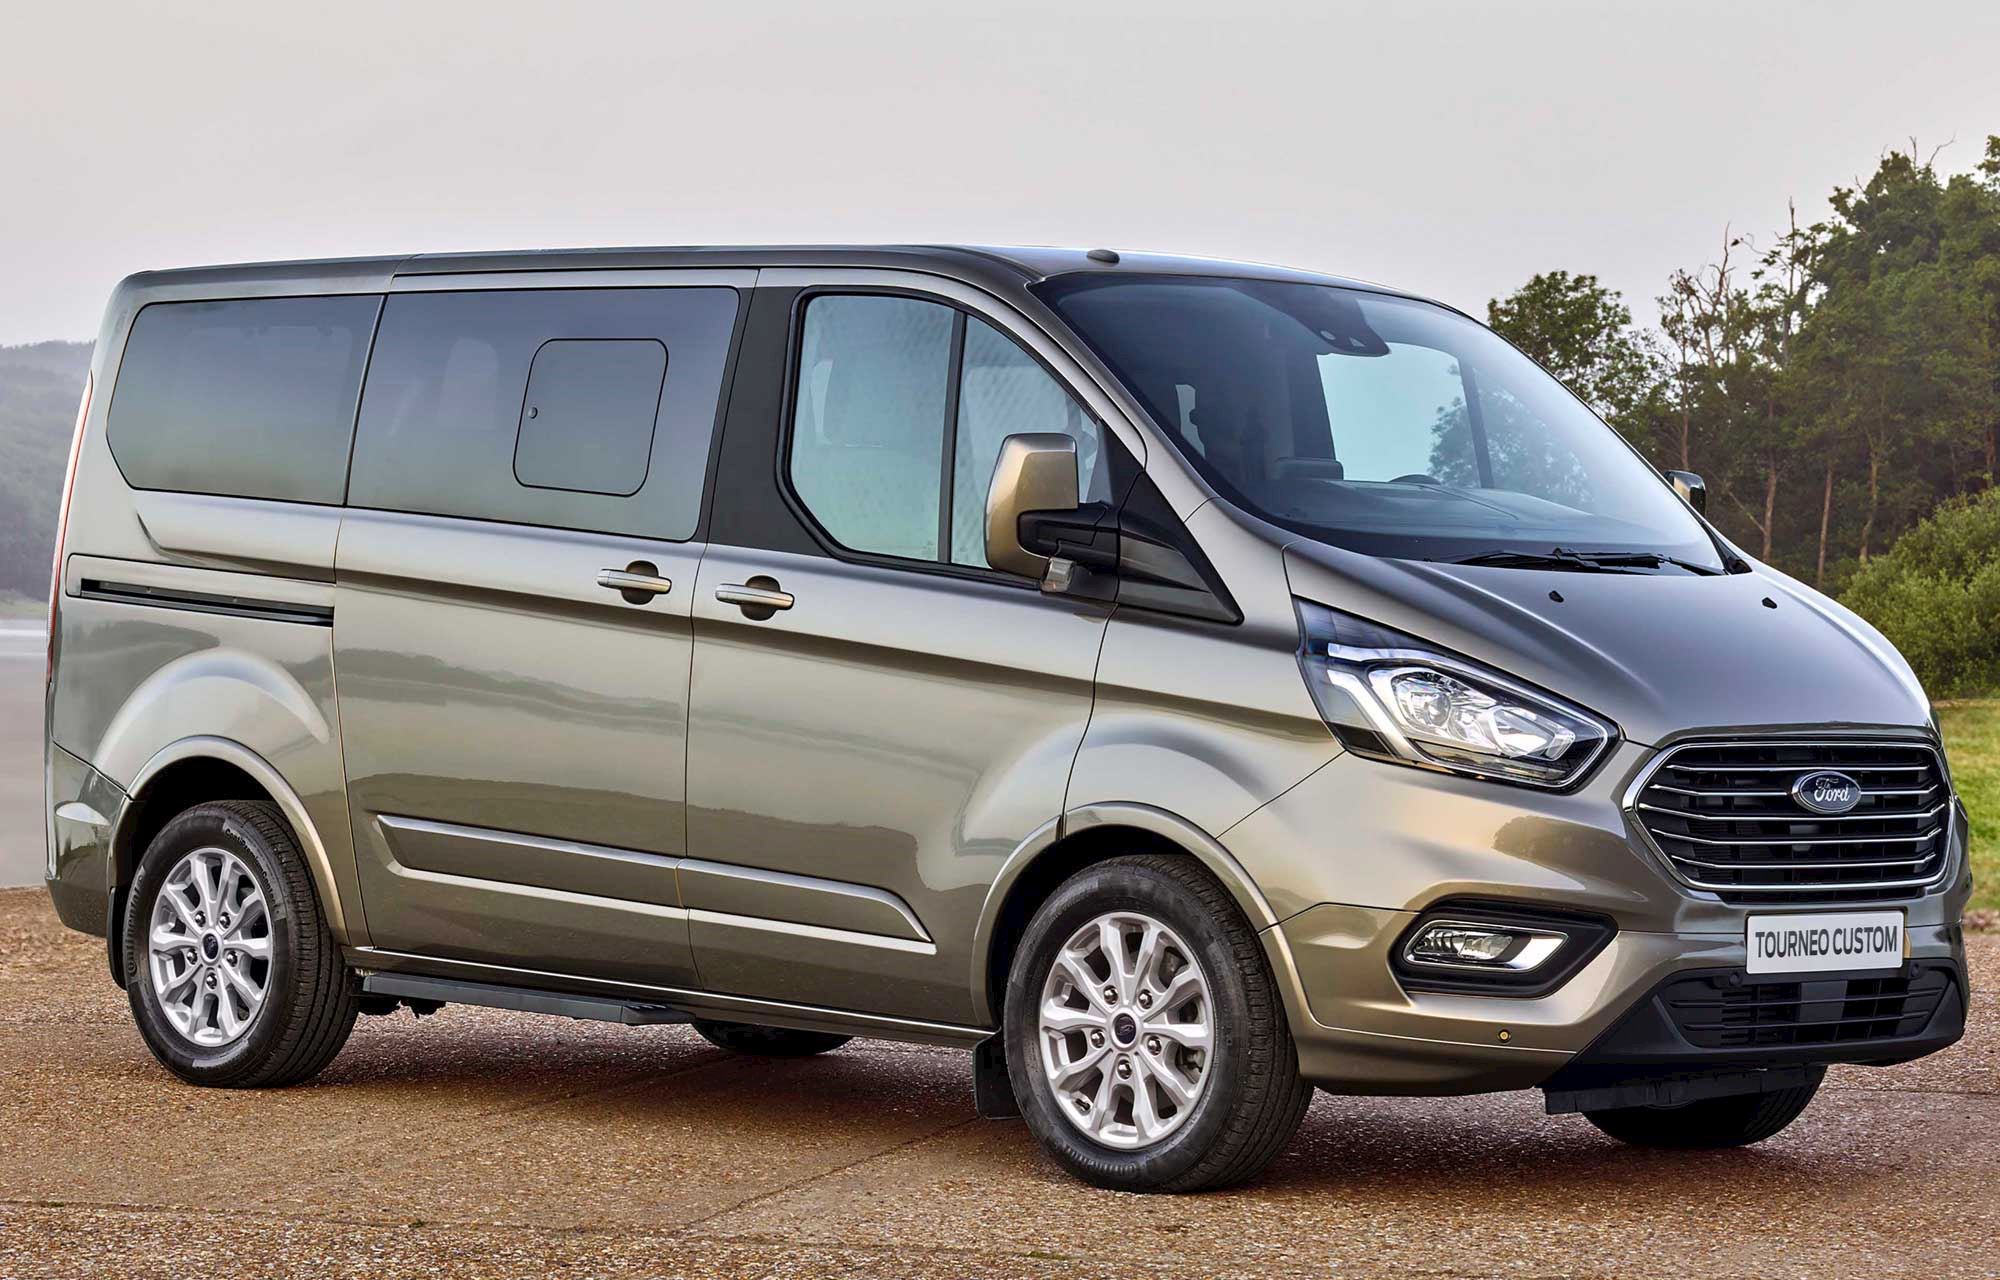 2019 Ford Tourneo Custom Exterior Gallery